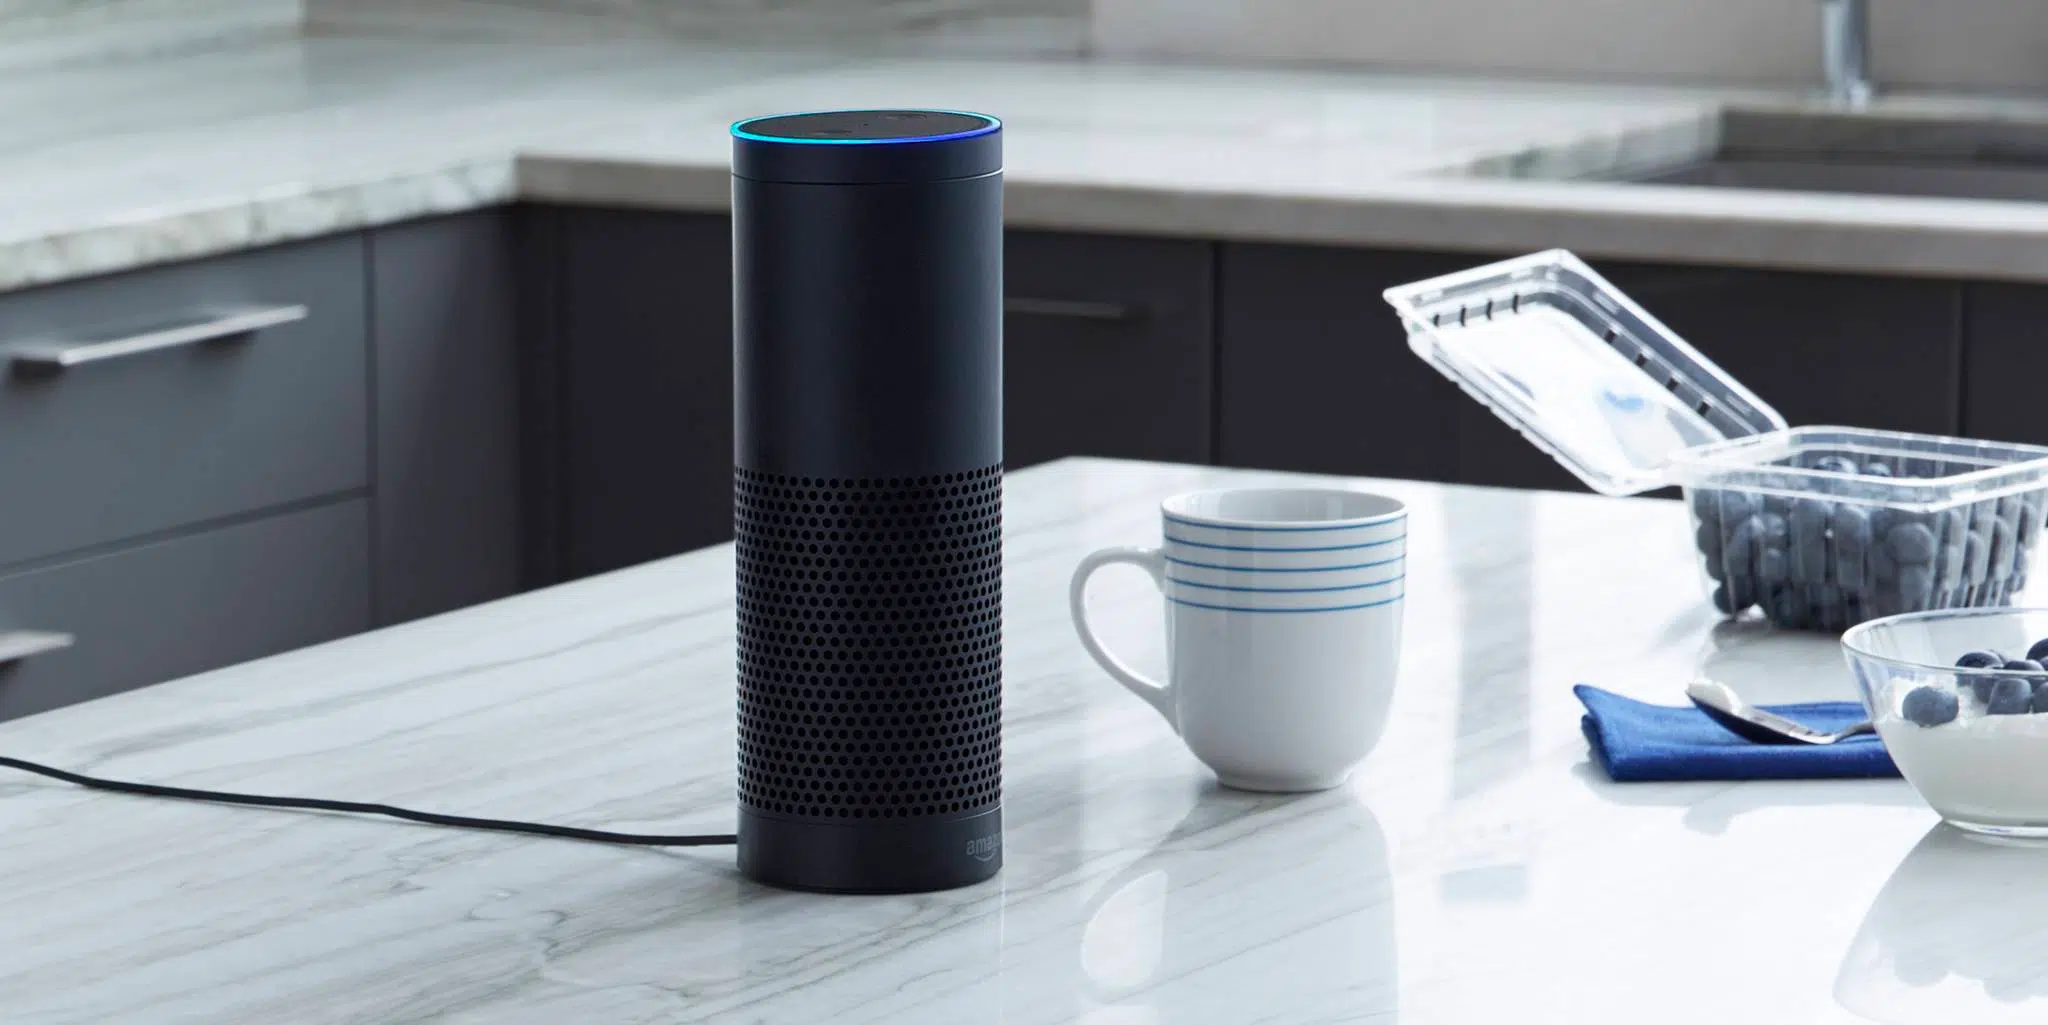 Amazon's Alexa Will Soon Be Able to Mimic Anyones Voice, Dead or Alive